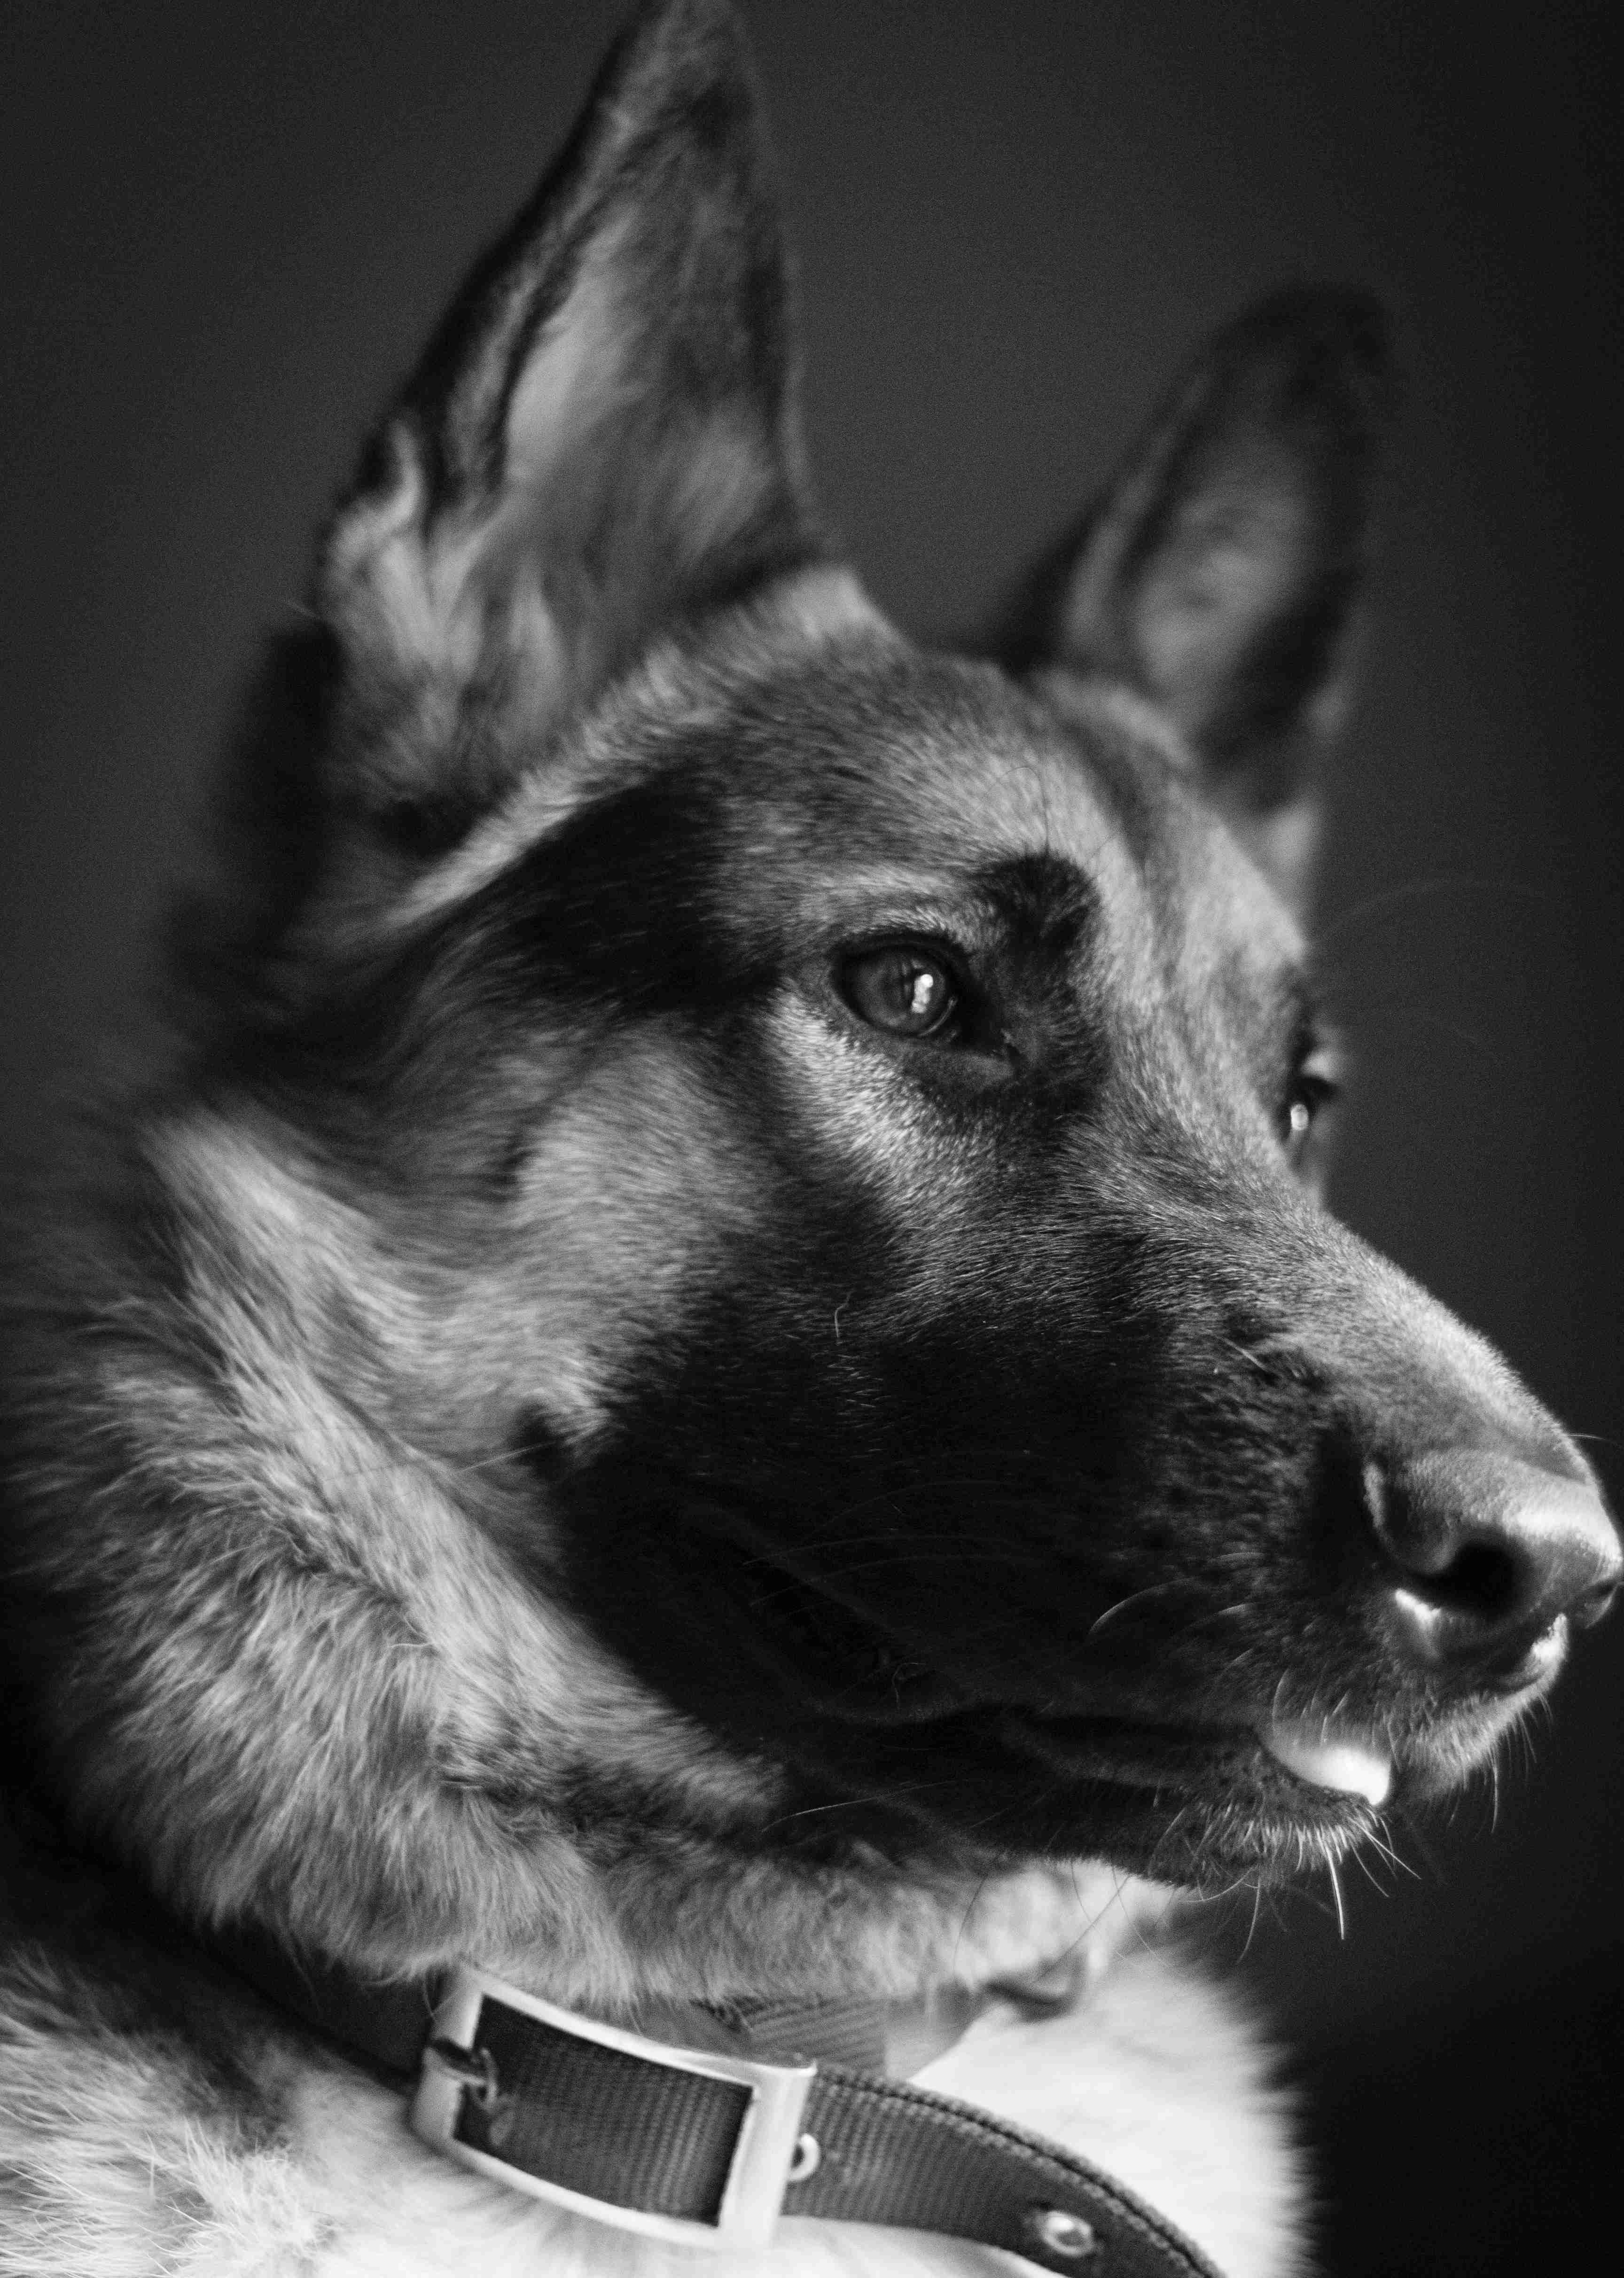 Can German shepherds be trained for specific tasks, such as search and rescue or therapy work?